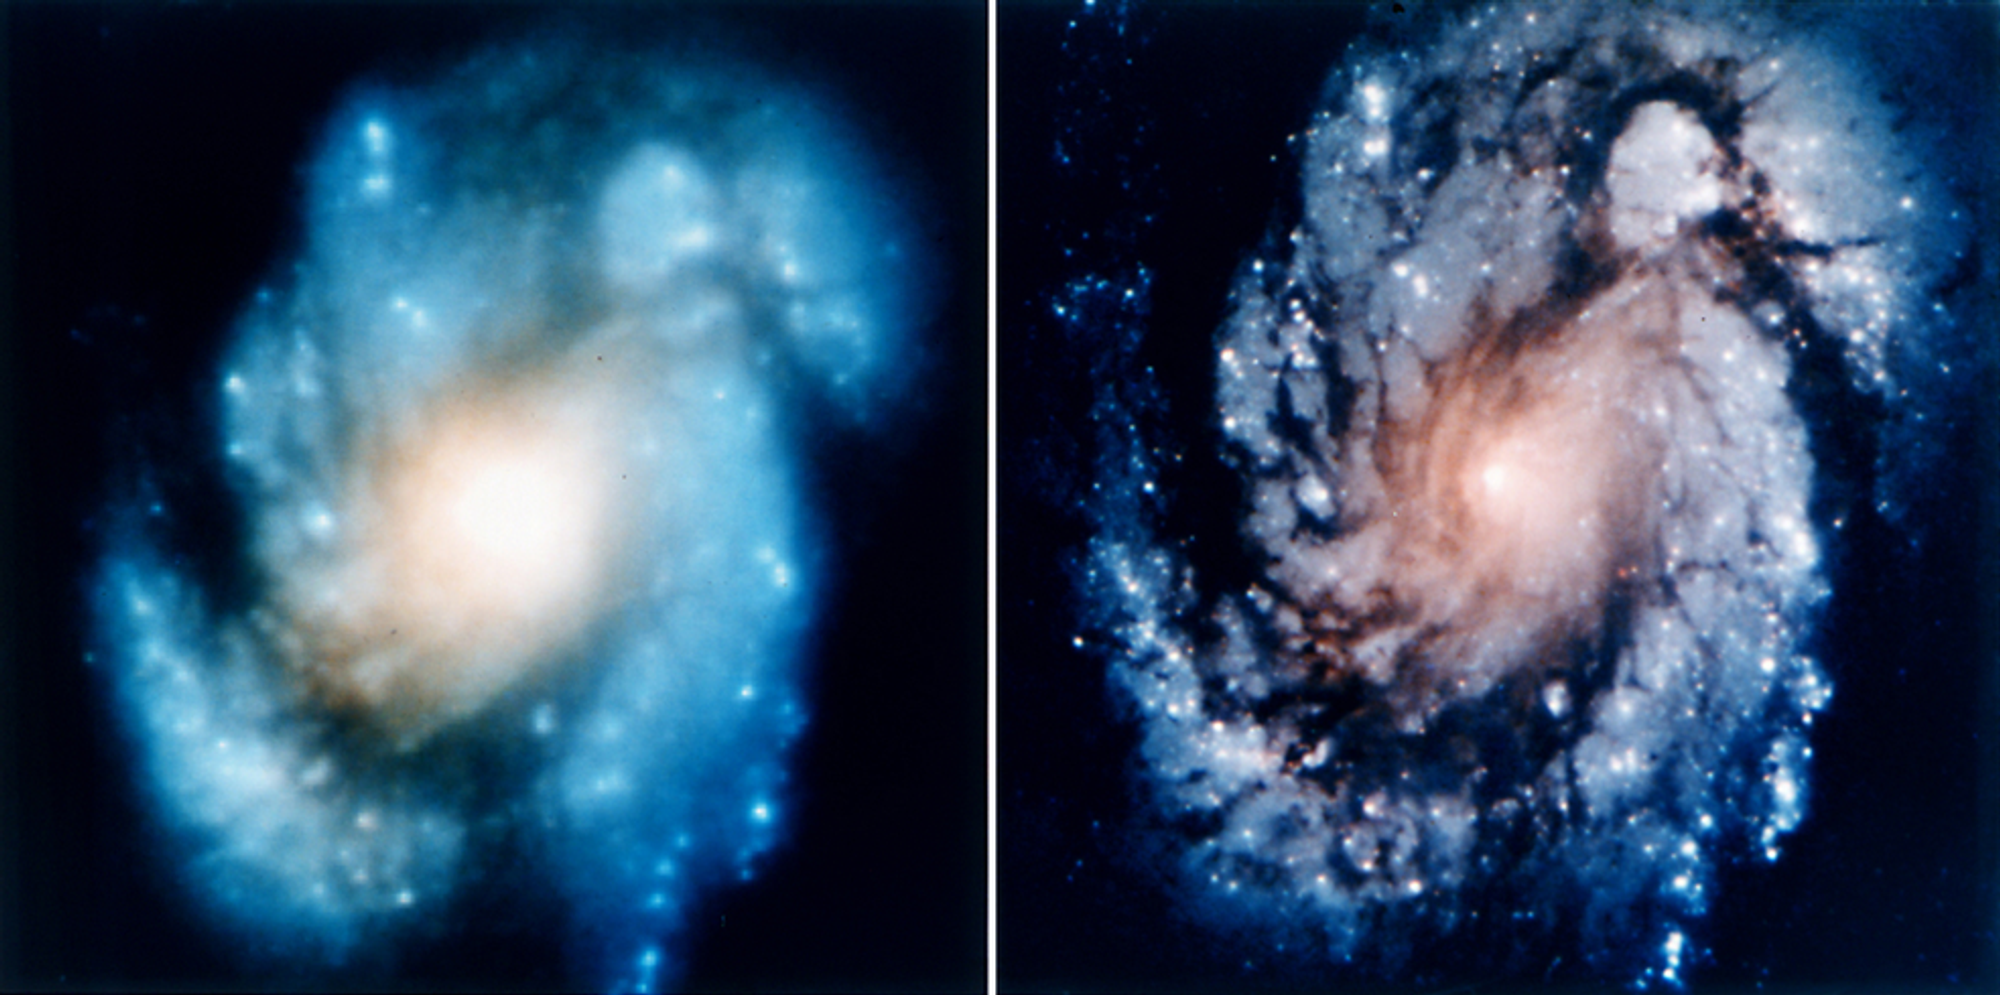 Two images of galaxies, one blurry and one clear